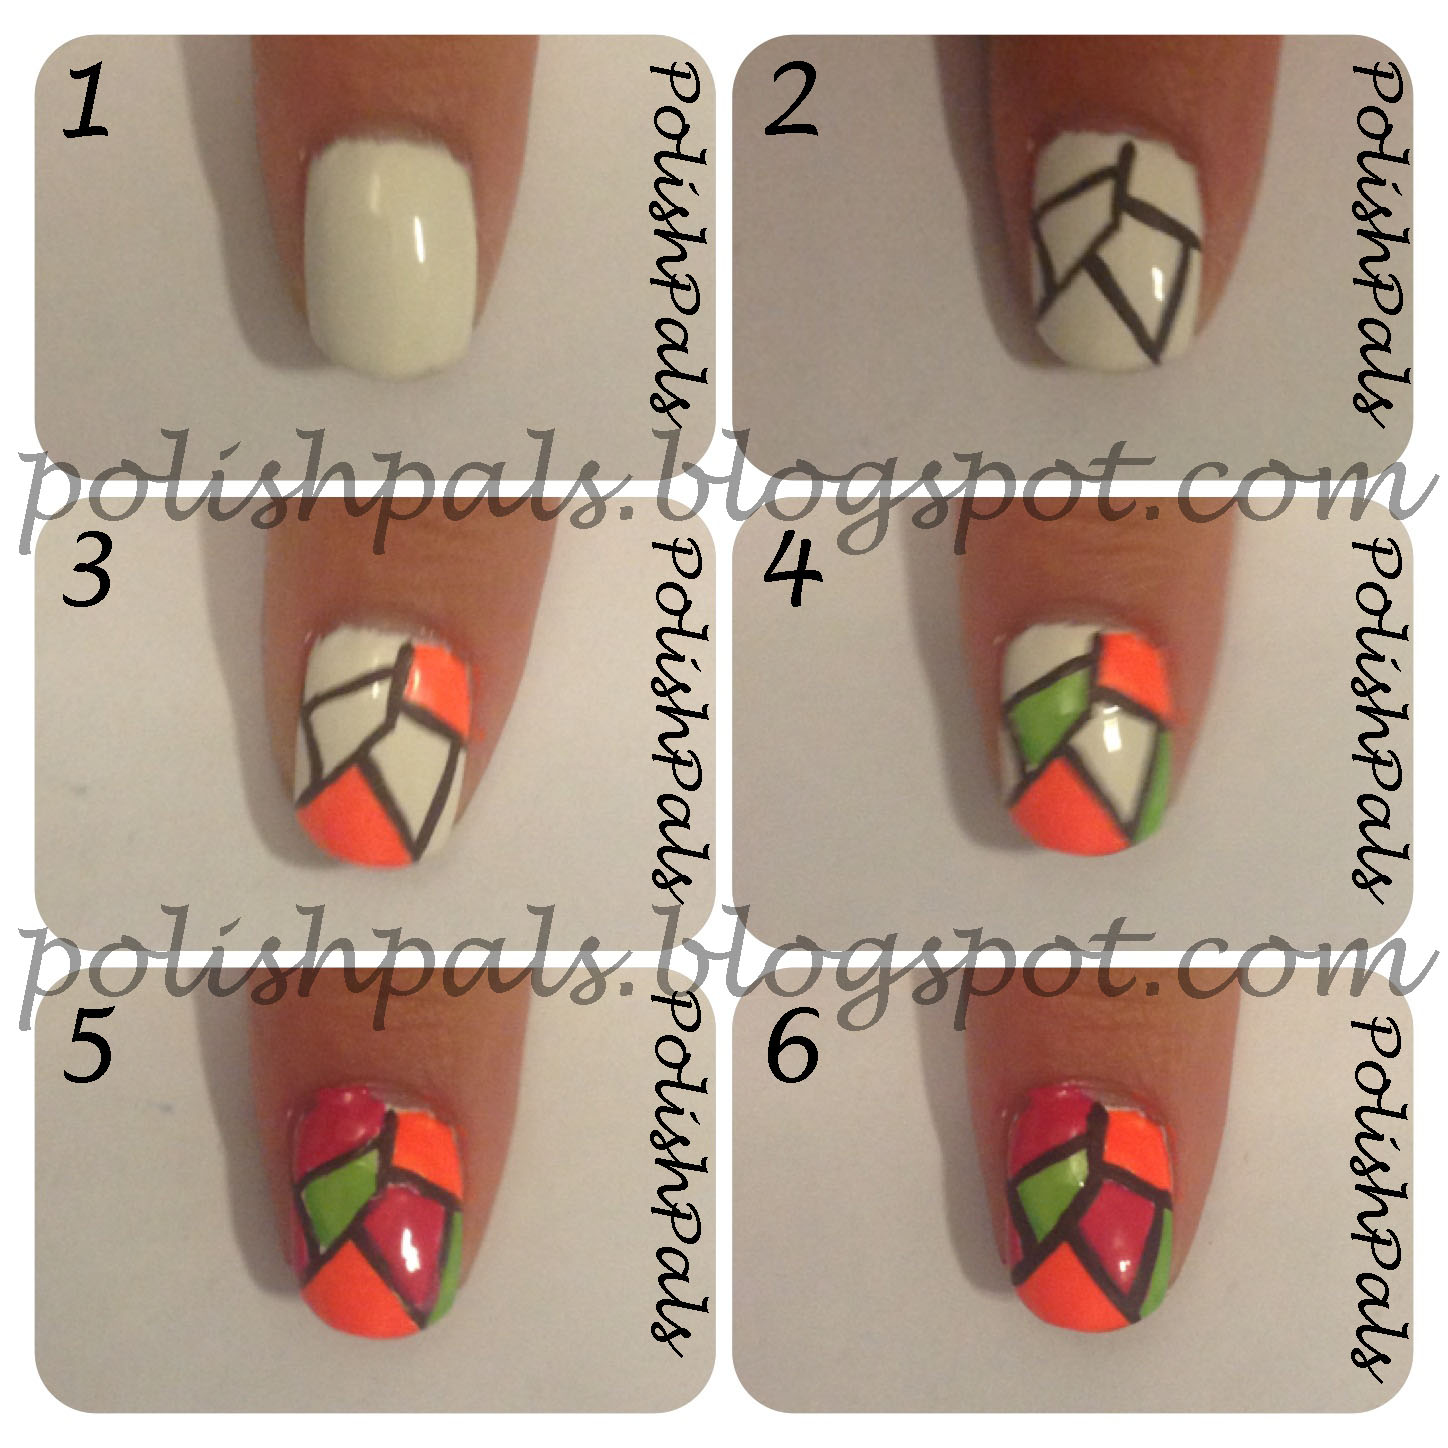 Polish Pals: Stained Glass Nails Tutorial